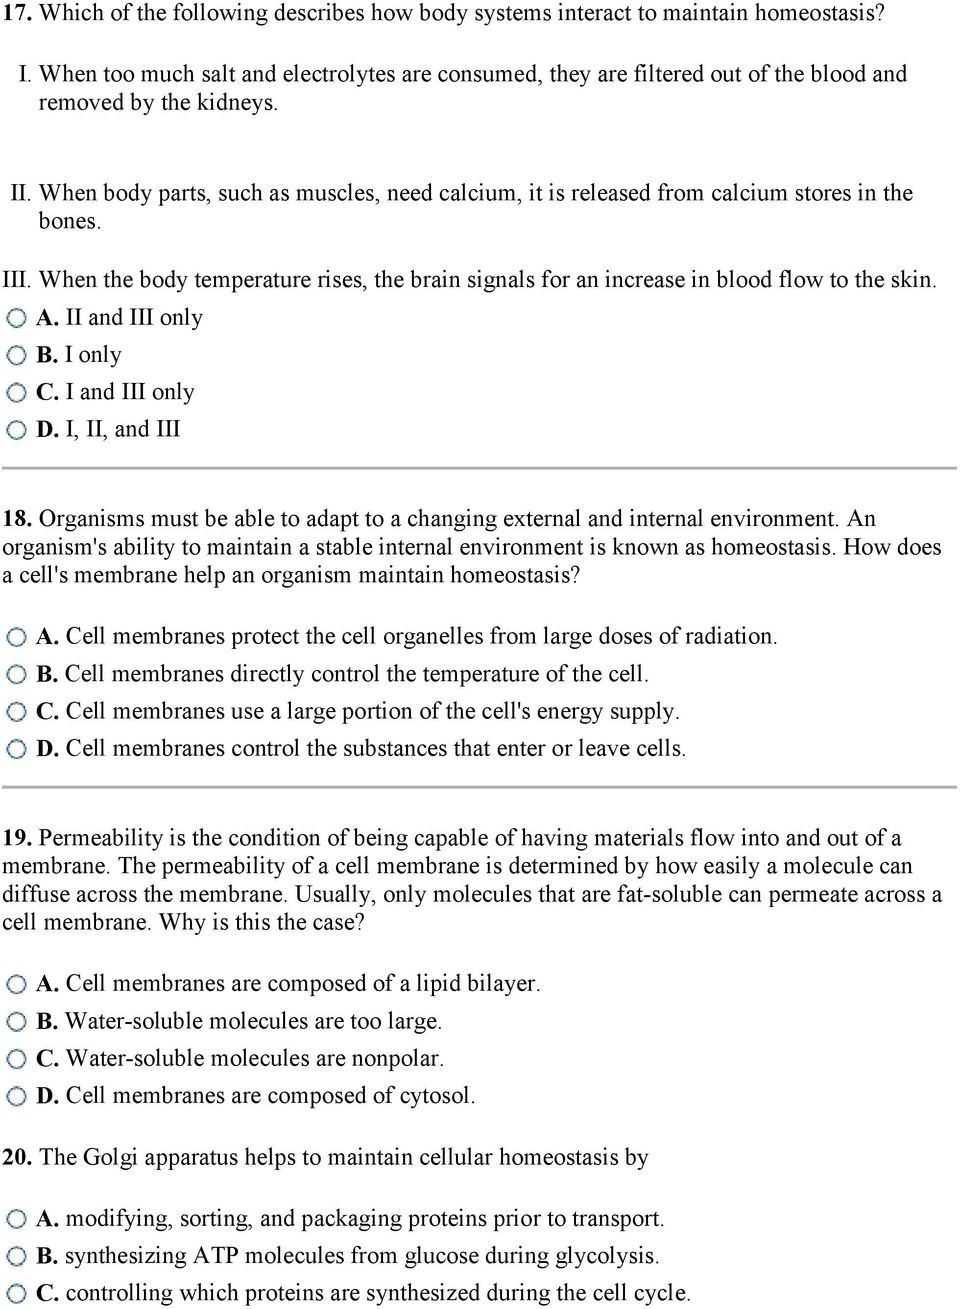 Cell Transport Review Worksheet Answers Homeostasis and Cell Transport Worksheet Answers